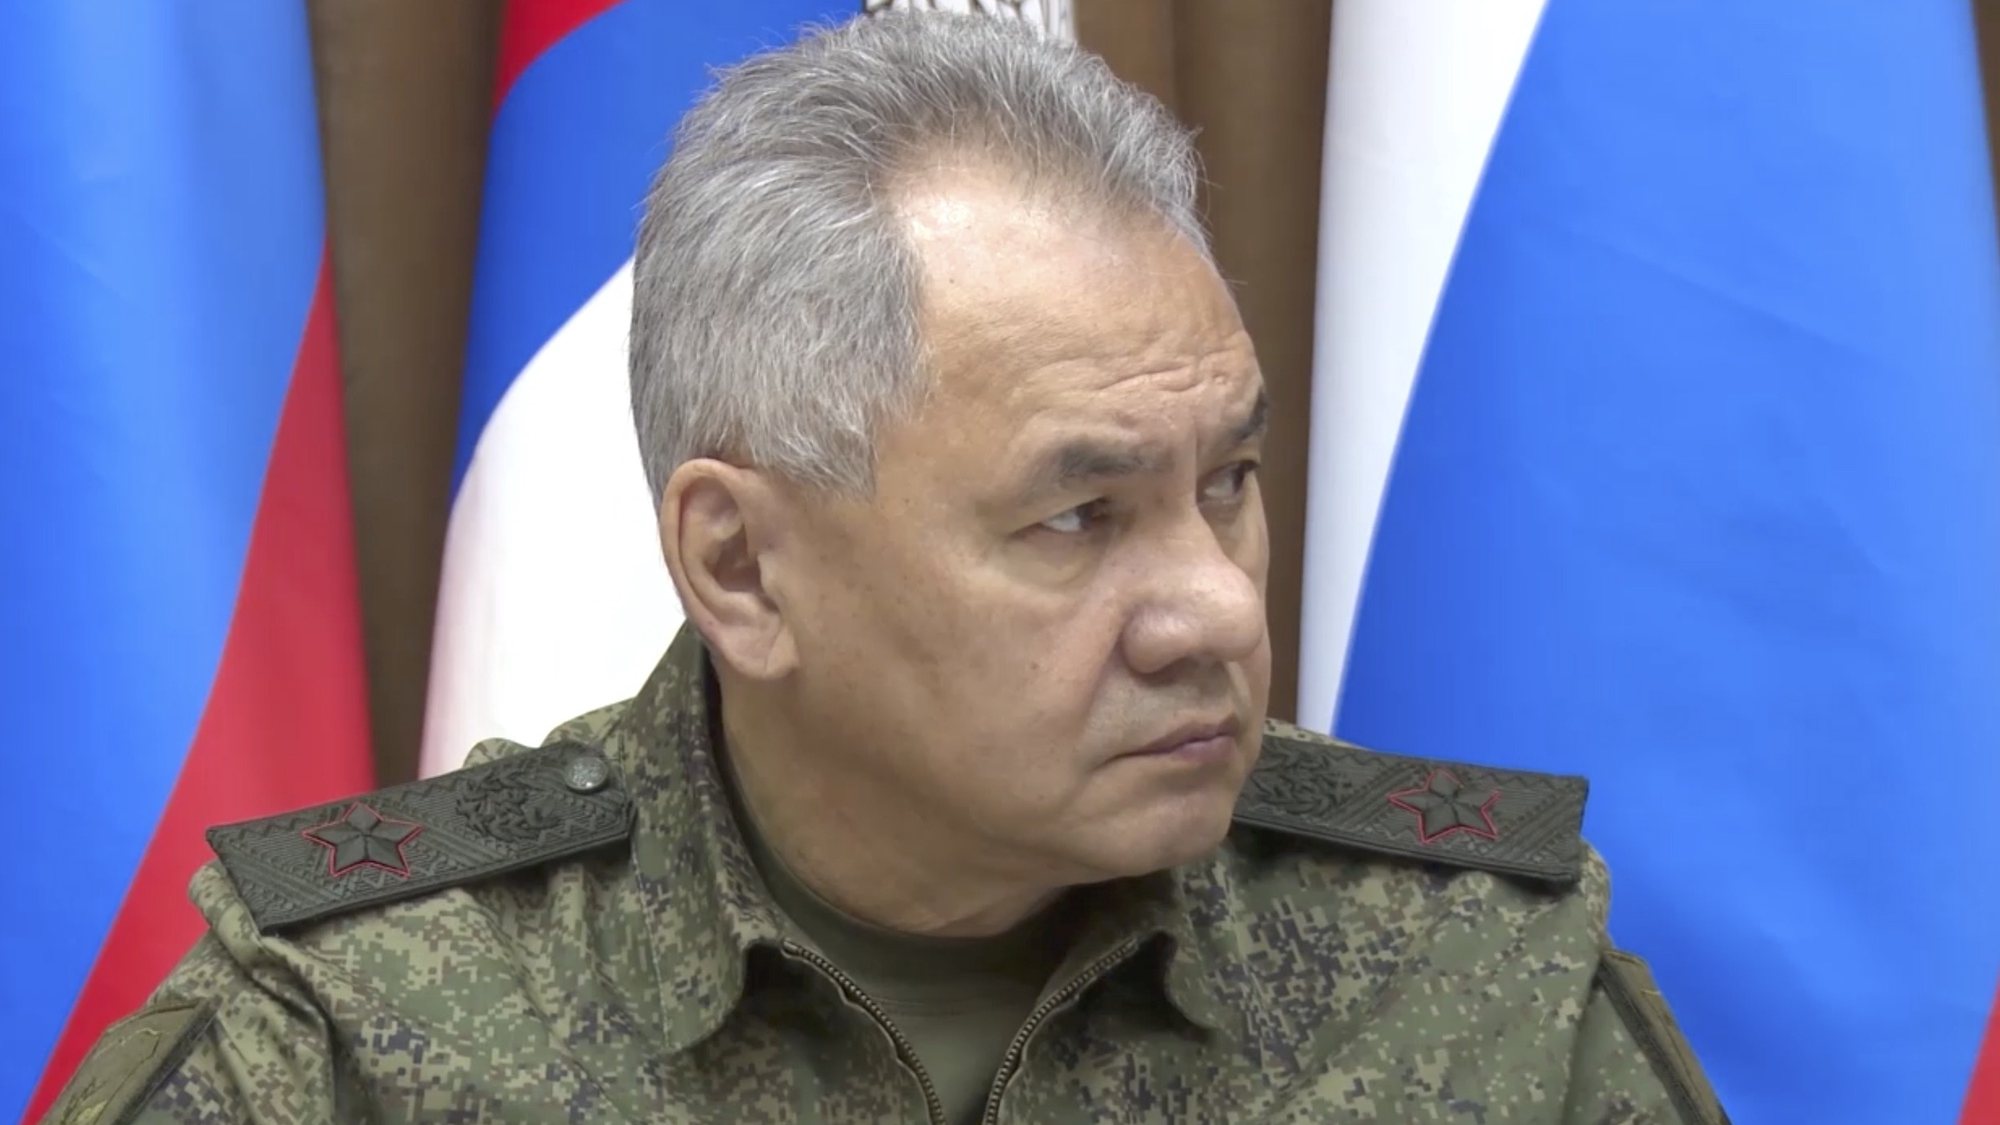 epa10296353 A handout still image taken from a handout video provided by the Russian Defence ministry press-service shows Russia&#039;s Defence Minister Sergei Shoigu listens to a report of the General of the Army Sergei Surovikin, commander of the joint group of troops in the area of ​​the special military operation, about situation in Kherson region, in Moscow, Russia, 09 November 2022. The Russian military will transfer their units to the left bank of the Dnieper river, General of the Army Sergei Surovikin, commander of the joint group of troops in the area of ​​the special military operation, said while reporting to Russian Defense Minister Sergei Shoigu. &#039;Comprehensively assessing the current situation, it is proposed to take up defense along the left bank of the Dnieper River. I understand that this is a very difficult decision,&#039; Surovikin said.  EPA/RUSSIAN DEFENCE MINISTRY PRESS SERVICE / HANDOUT  HANDOUT EDITORIAL USE ONLY/NO SALES